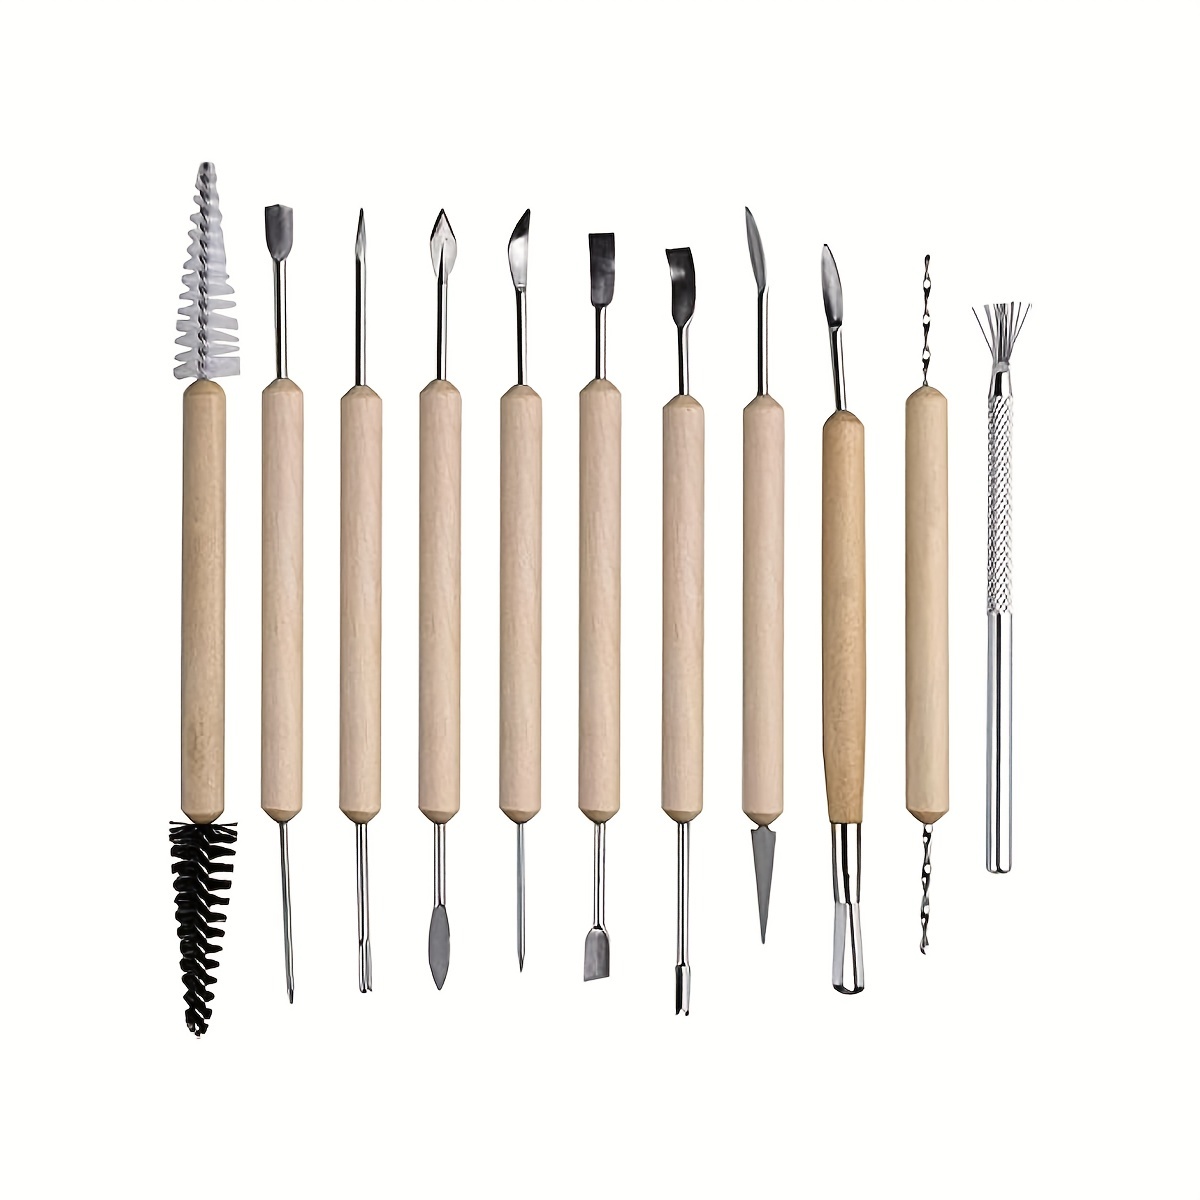 Clay Tools Pottery Sculpting Tools: 15pcs Air Dry Polymer Clay Carving Tools Set for Kids Adults - Stainless Steel Wooden Ceramic Clay Sculpting Kit